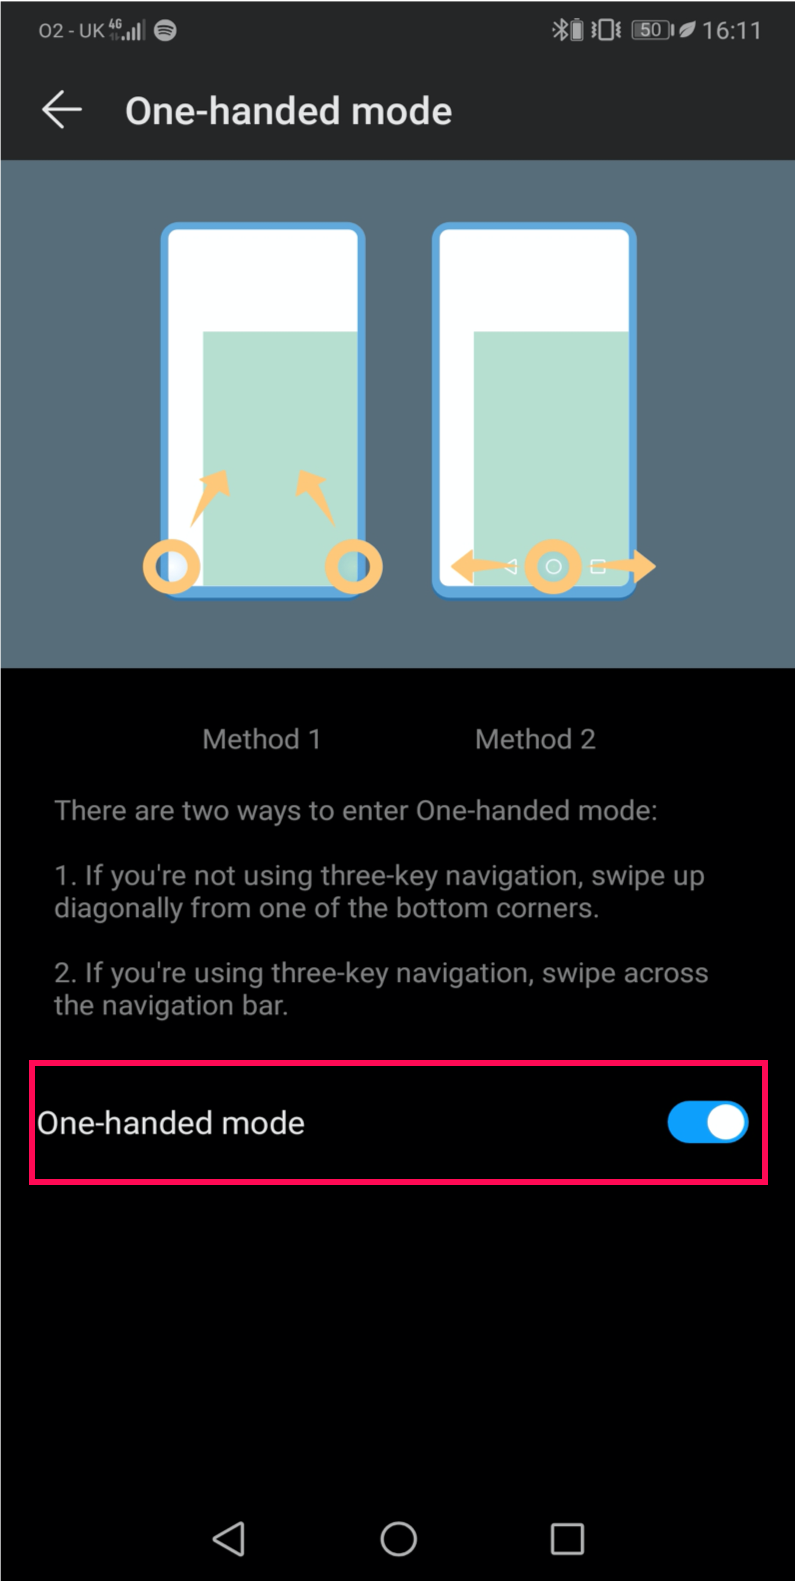 One-handed mode on Android - step 3